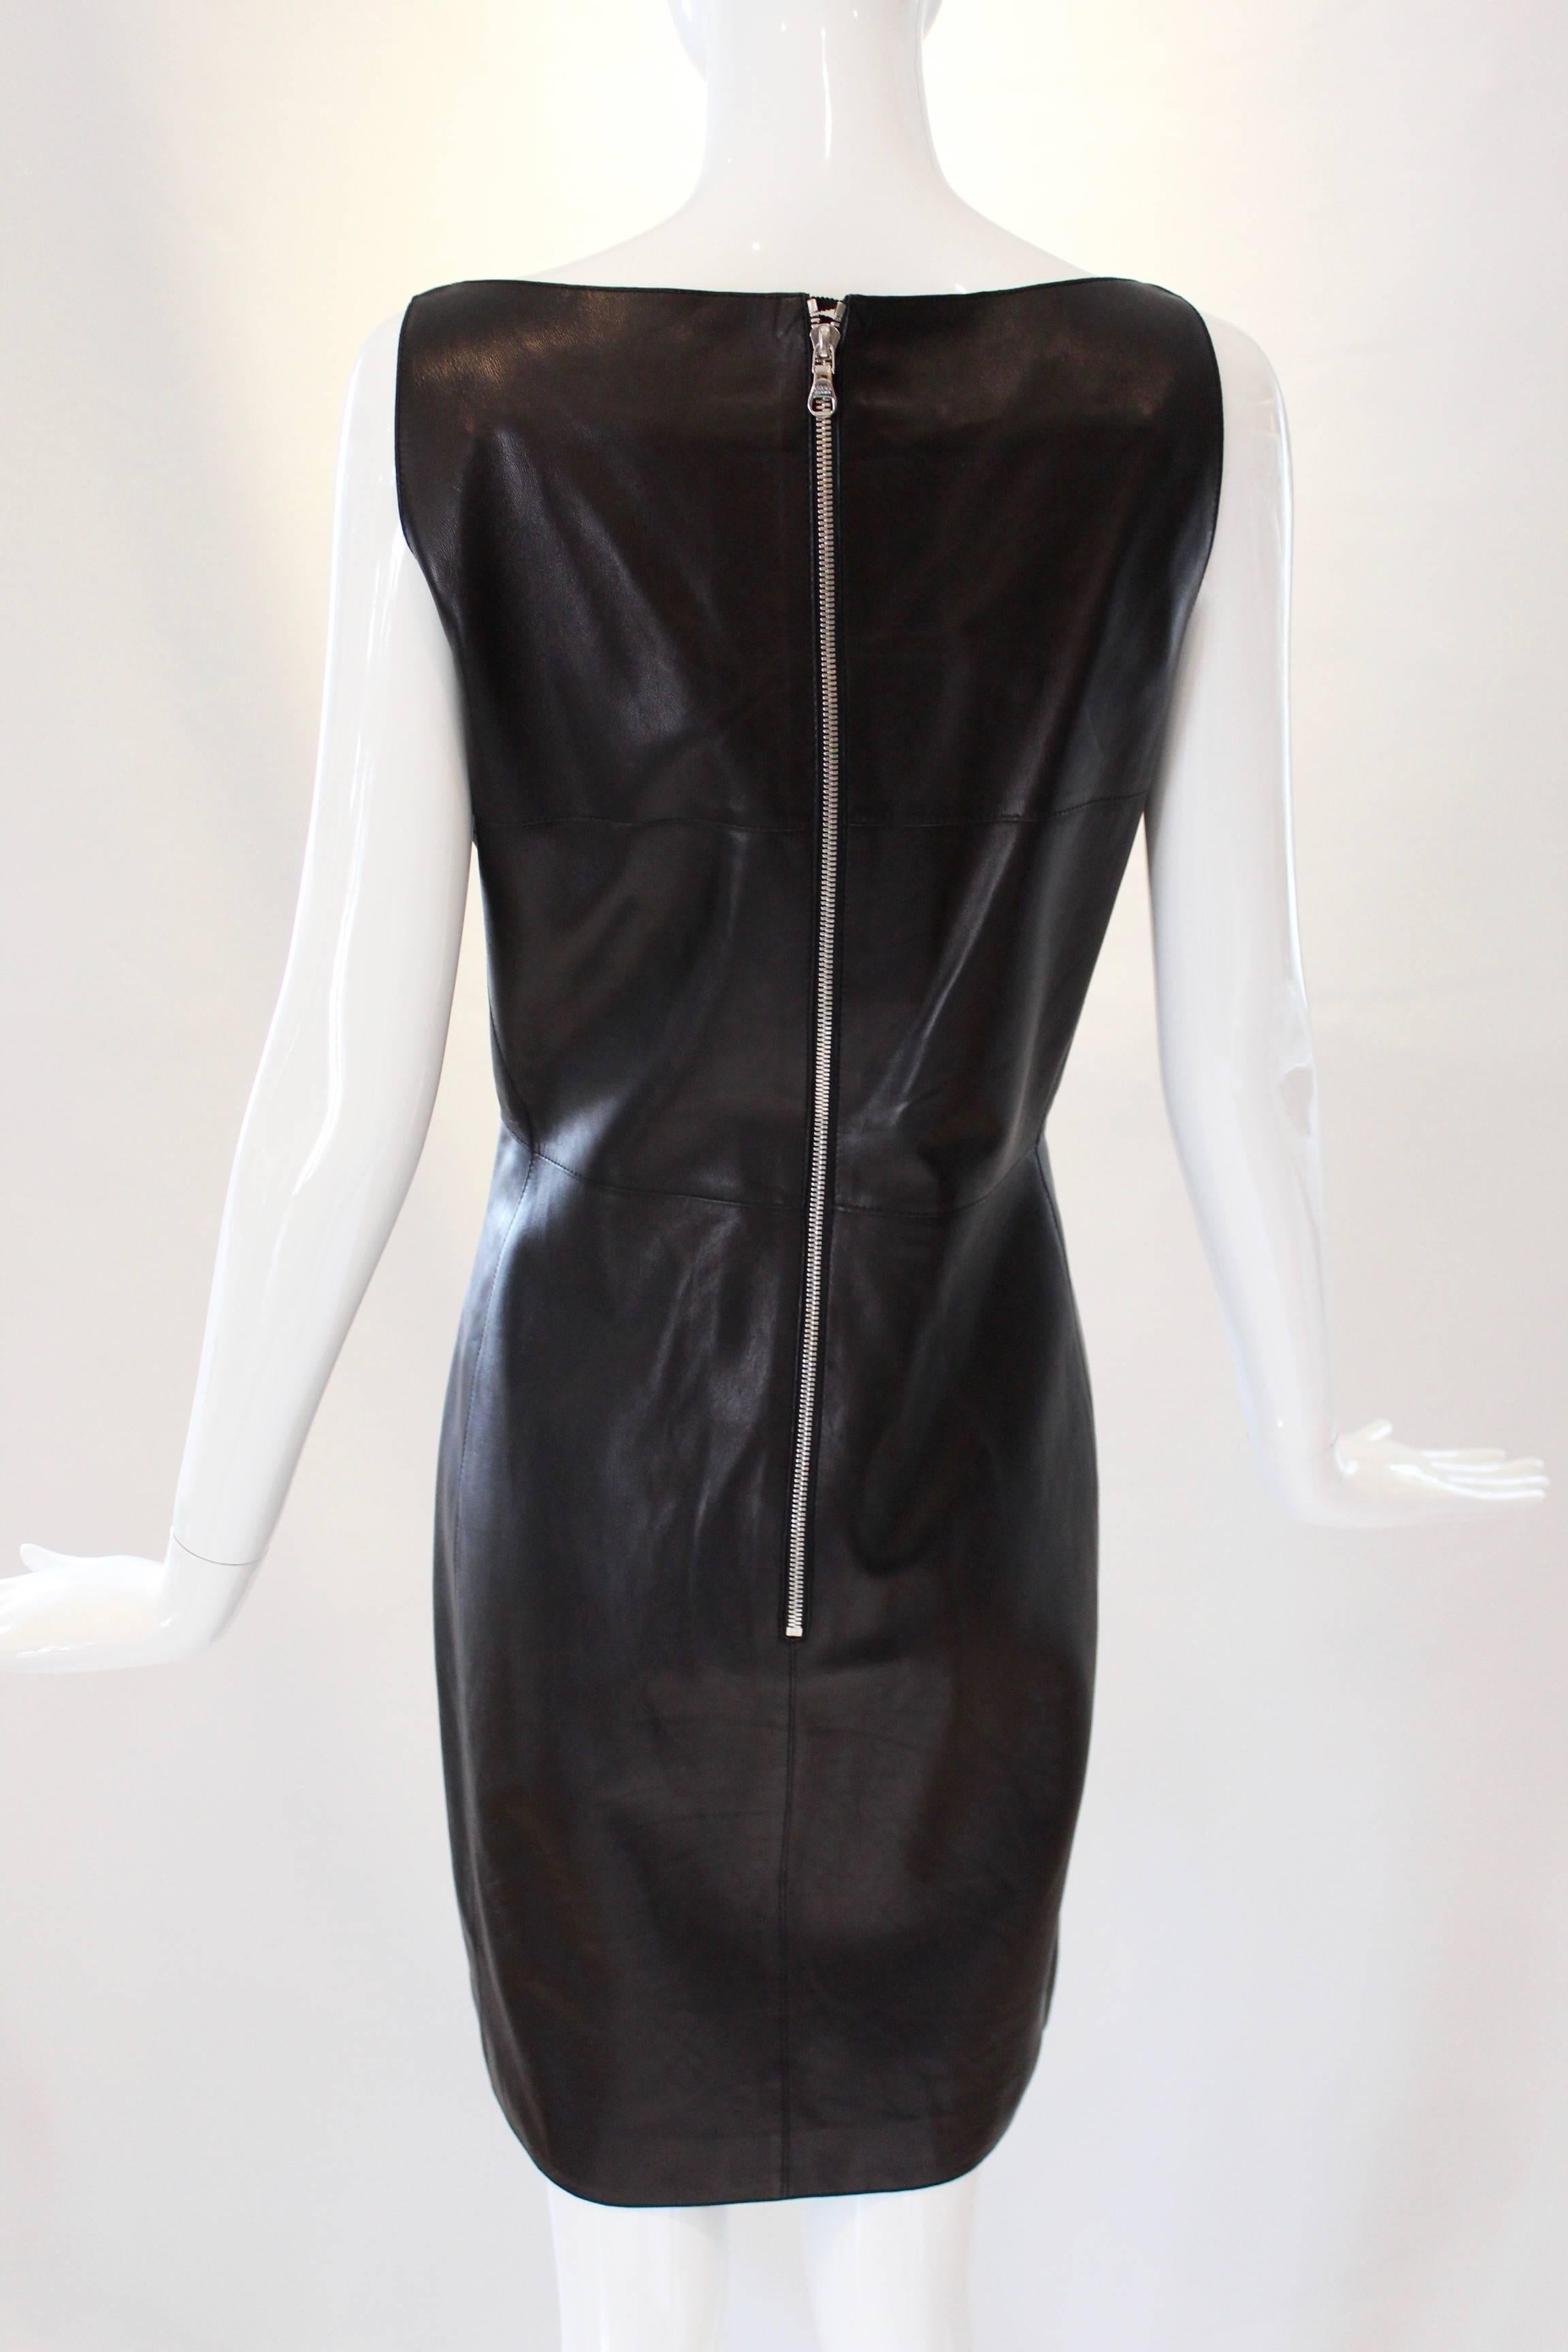 This Loewe Madrid Midi-Dress comes in a timeless feminine silhouette and is made up of the softest buttery black leather, which is exactly what this 19th-century Spanish fashion house is known for. An exposed silver zipper at the back gives a touch